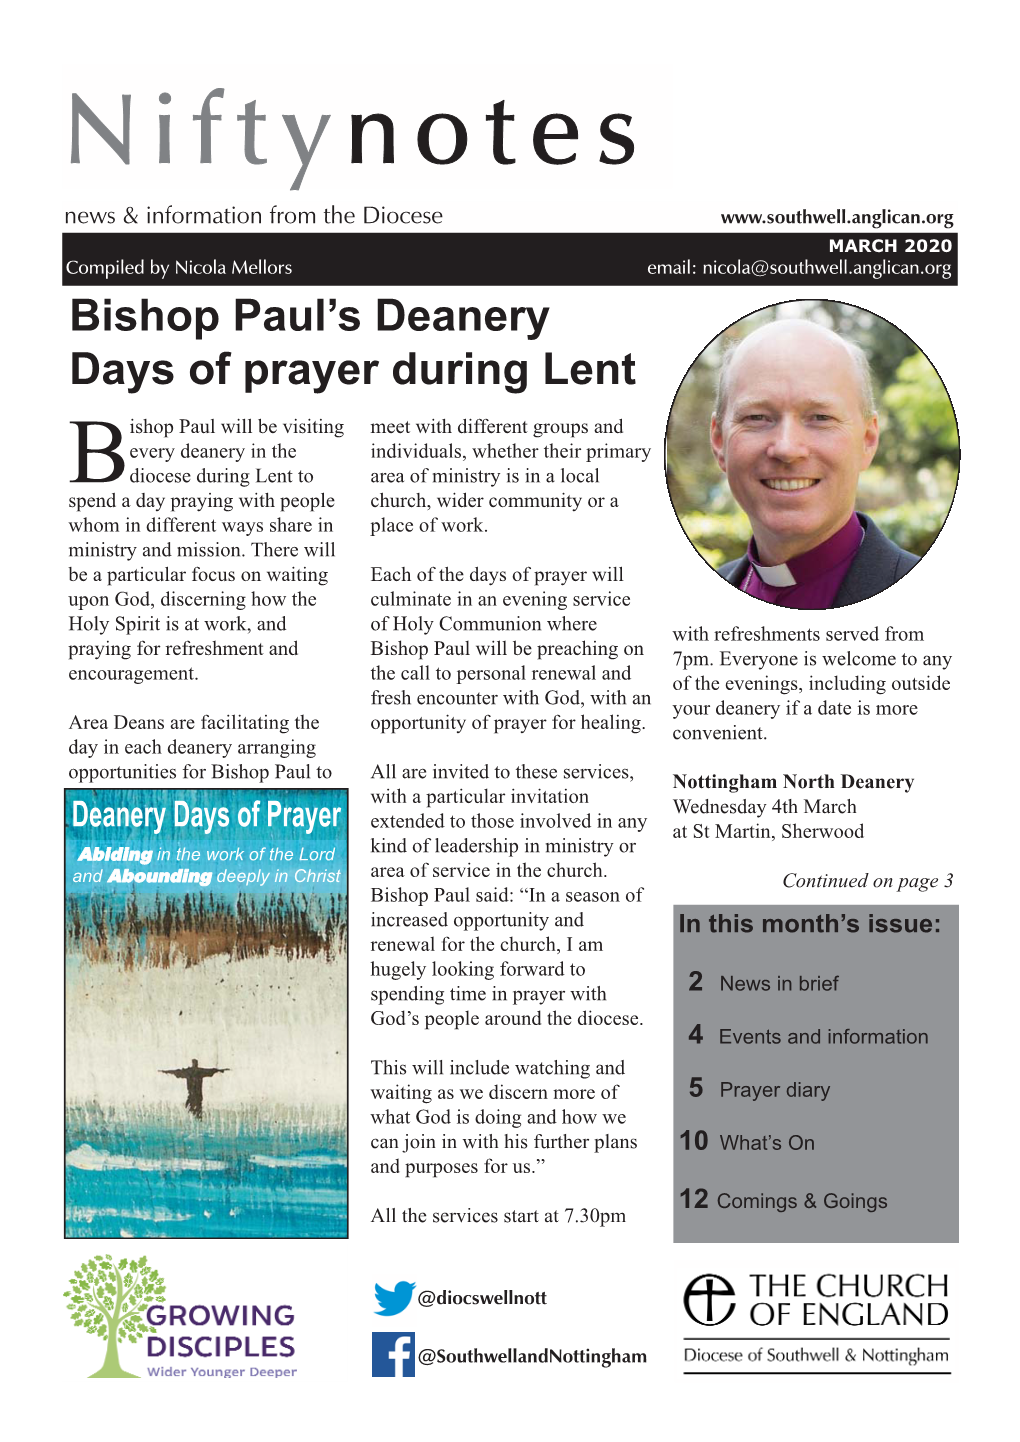 MARCH 2020 Compiled by Nicola Mellors Email: Nicola@Southwell.Anglican.Org Bishop Paul’S Deanery Days of Prayer During Lent